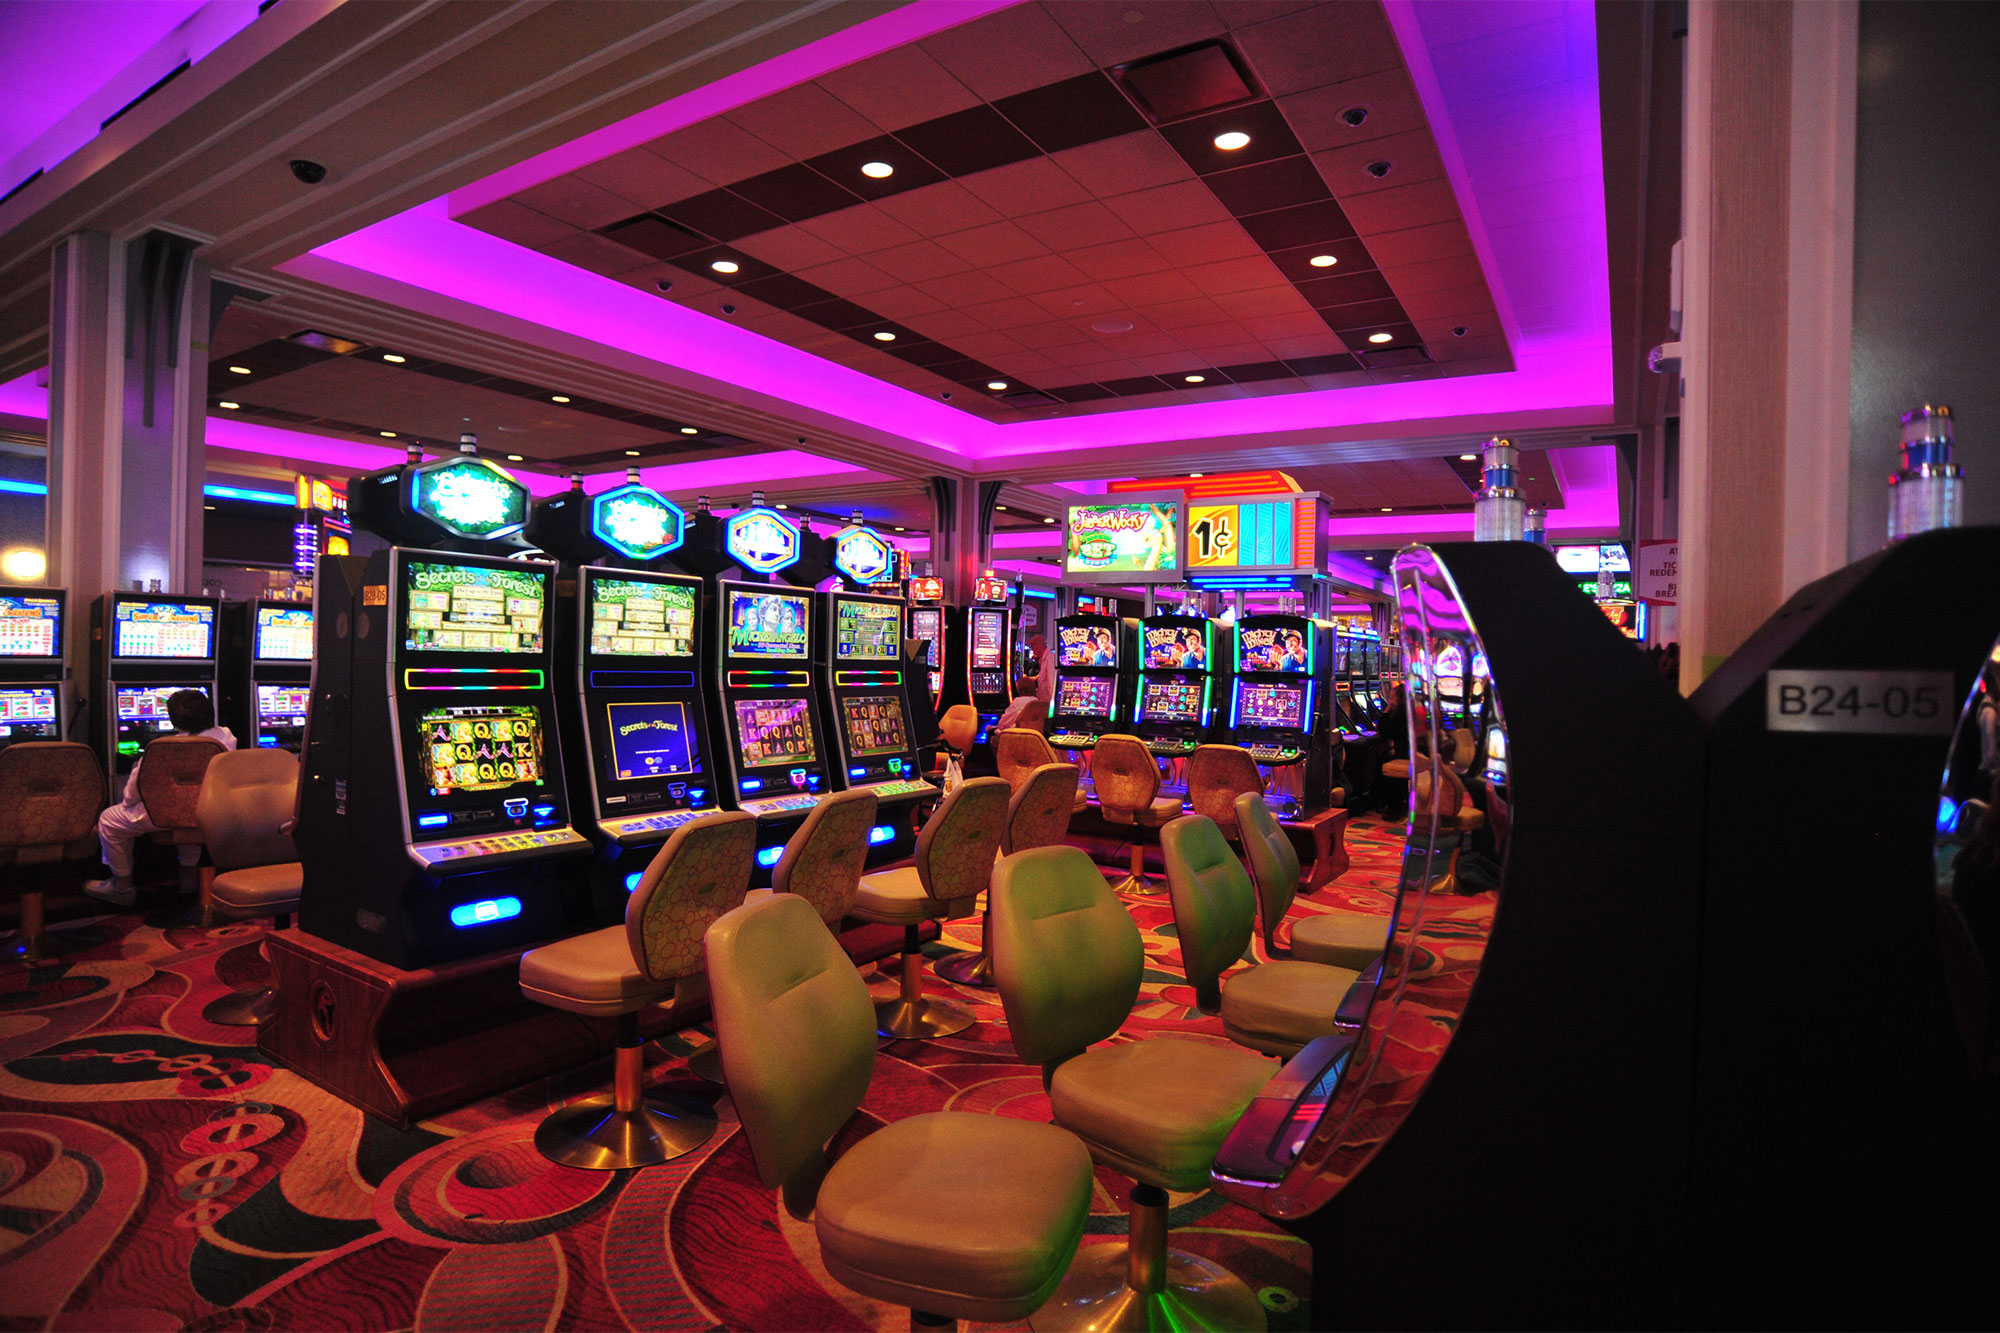 What are the ways to win at Online Slot Machines?